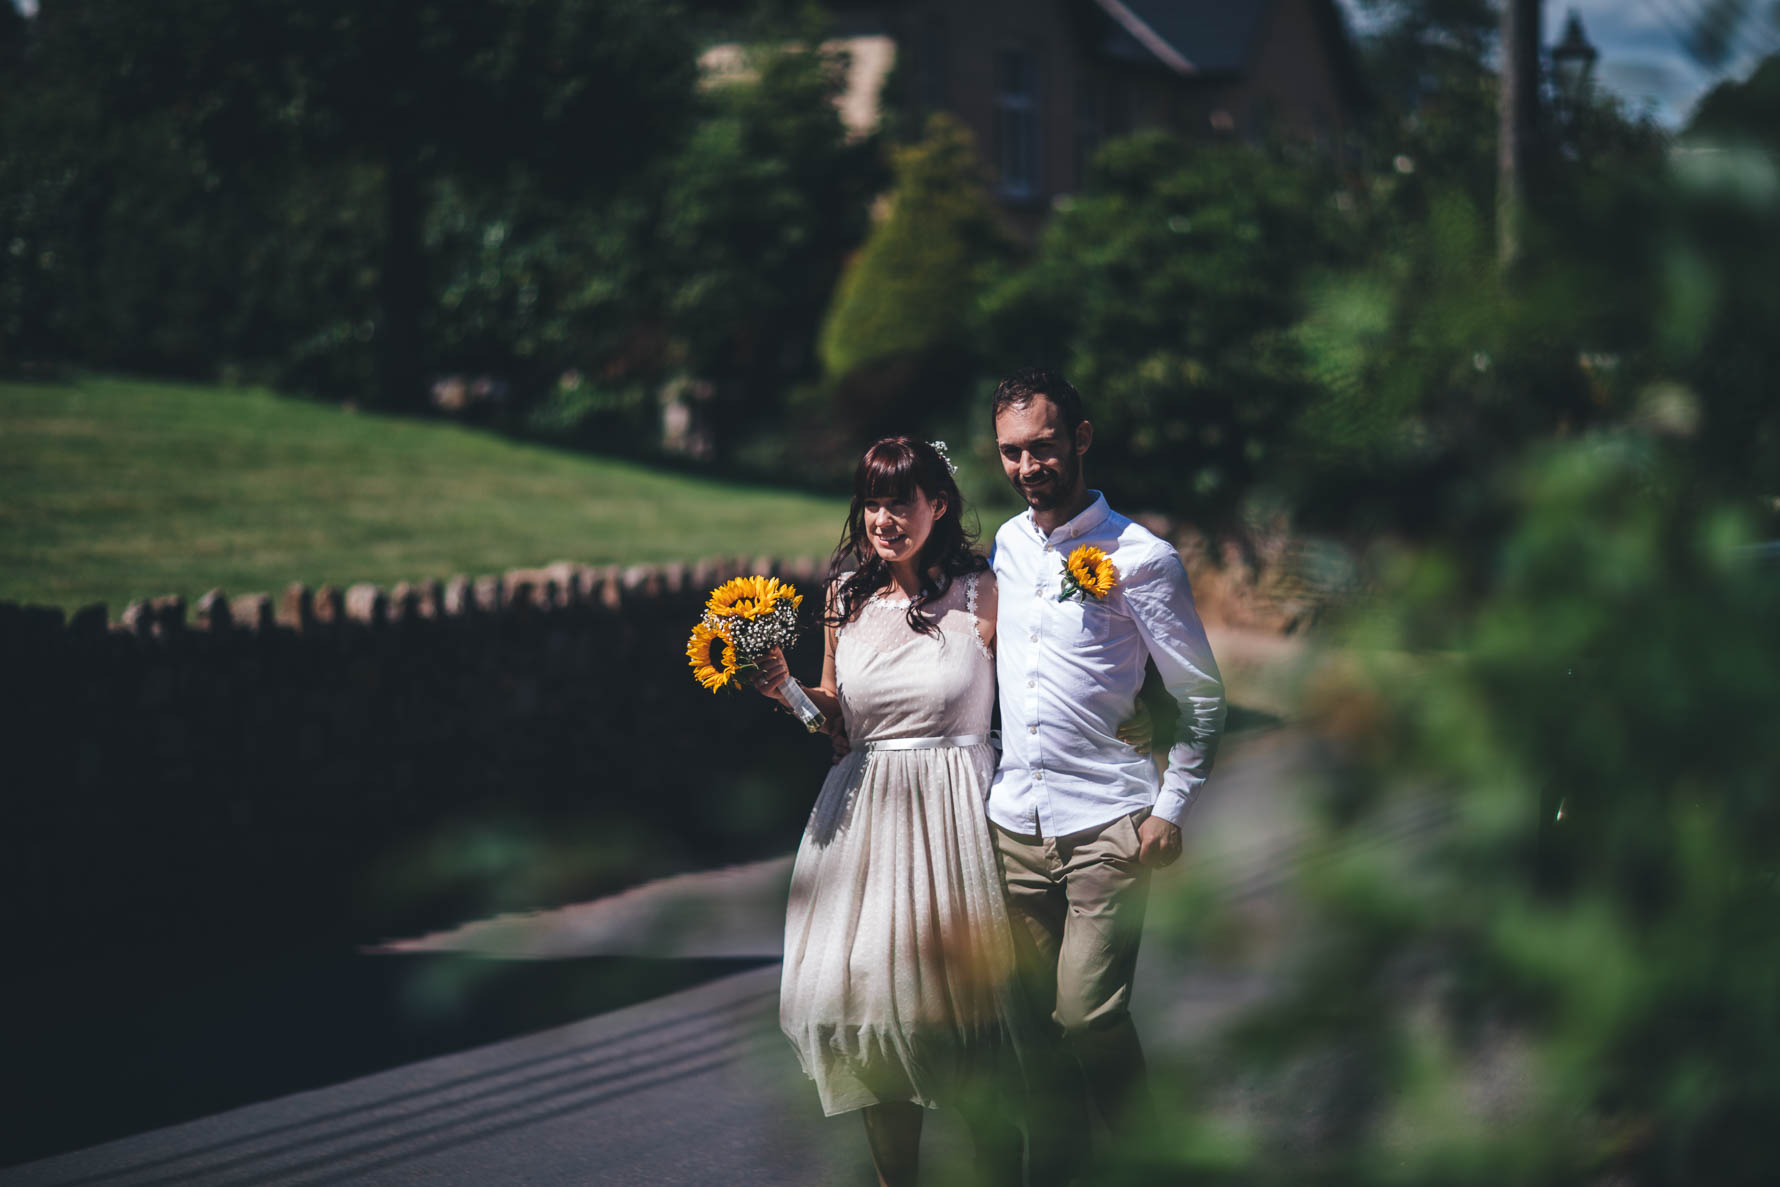 Bride and groom walking down a path in a churchyard. The groom has his arm around the bride's waist. The bride is holding a bouquet of sunflowers and the groom has a sunflower pinned to his white shirt.